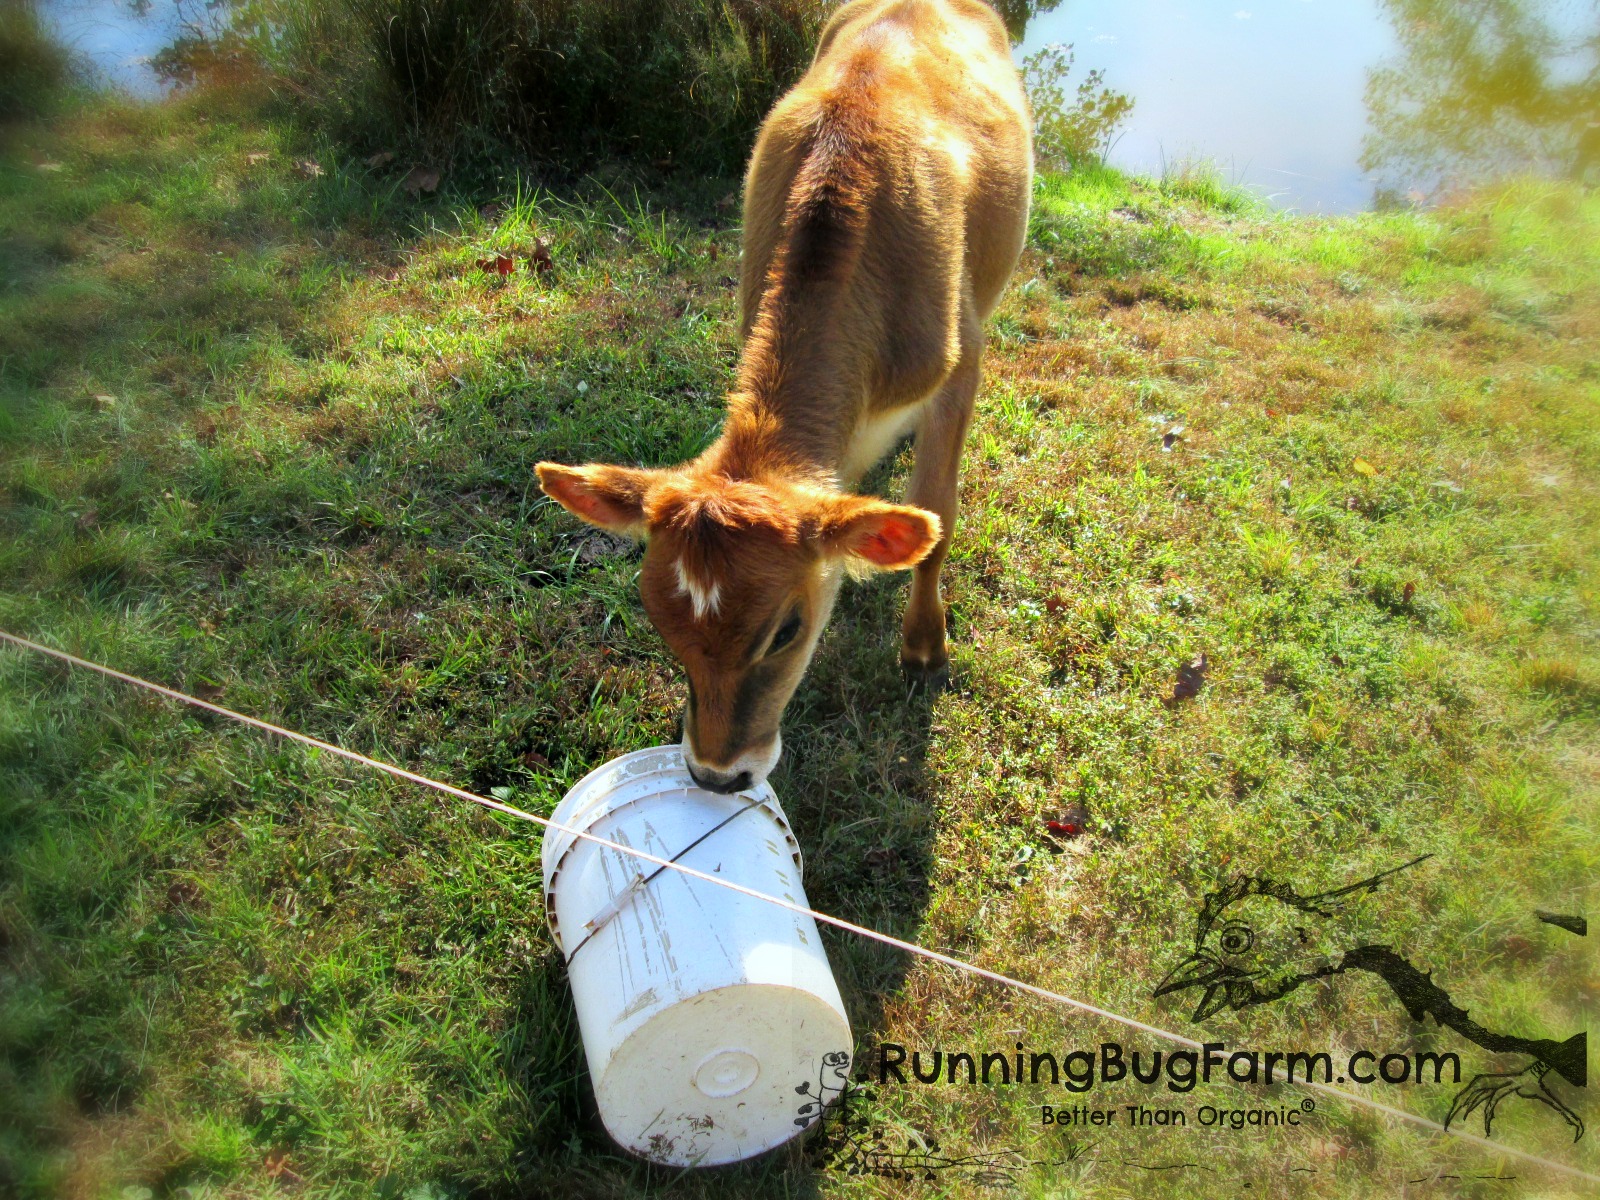 How do you get a bottle fed cow to drink from a fresh water source when she previously only drank from a bucket?